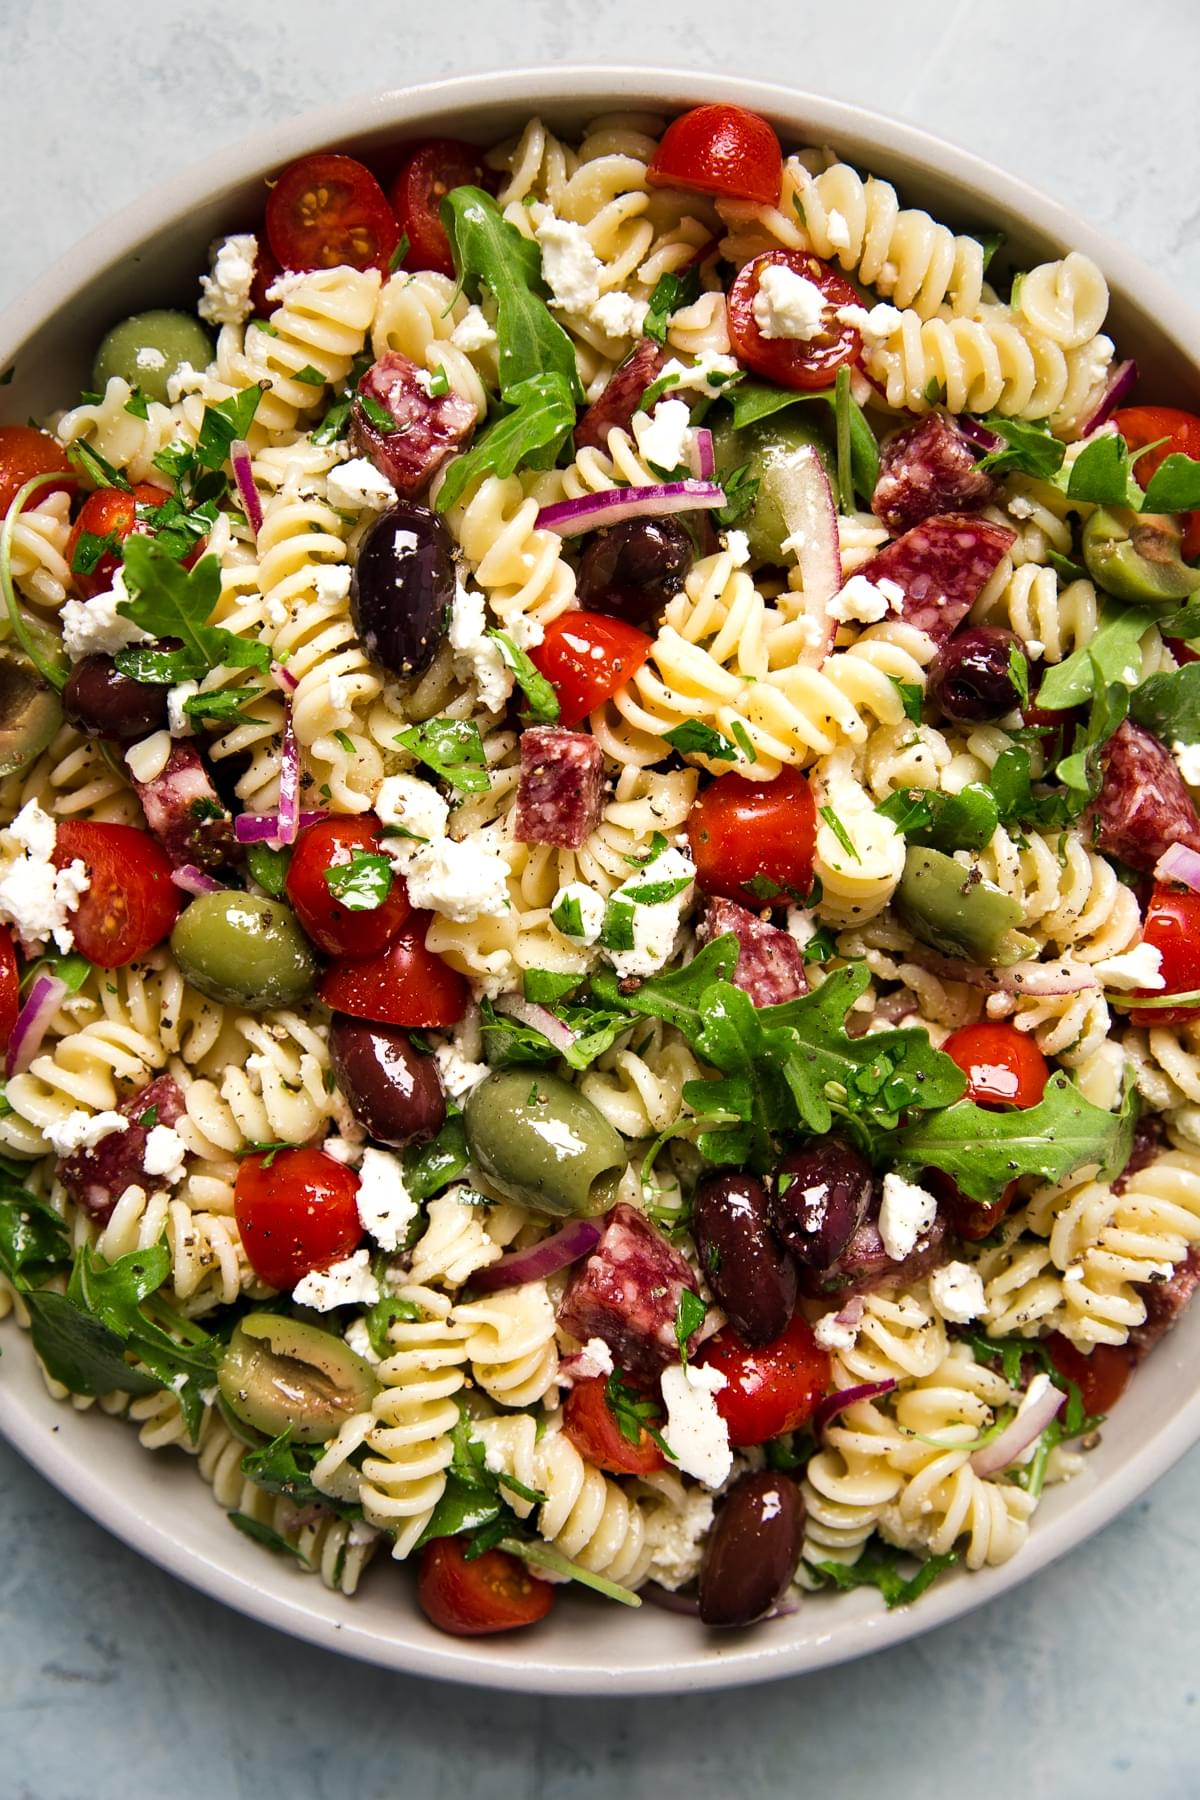 Mediterranean Pasta Salad in a bowl with feta, olives, tomatoes and arugula